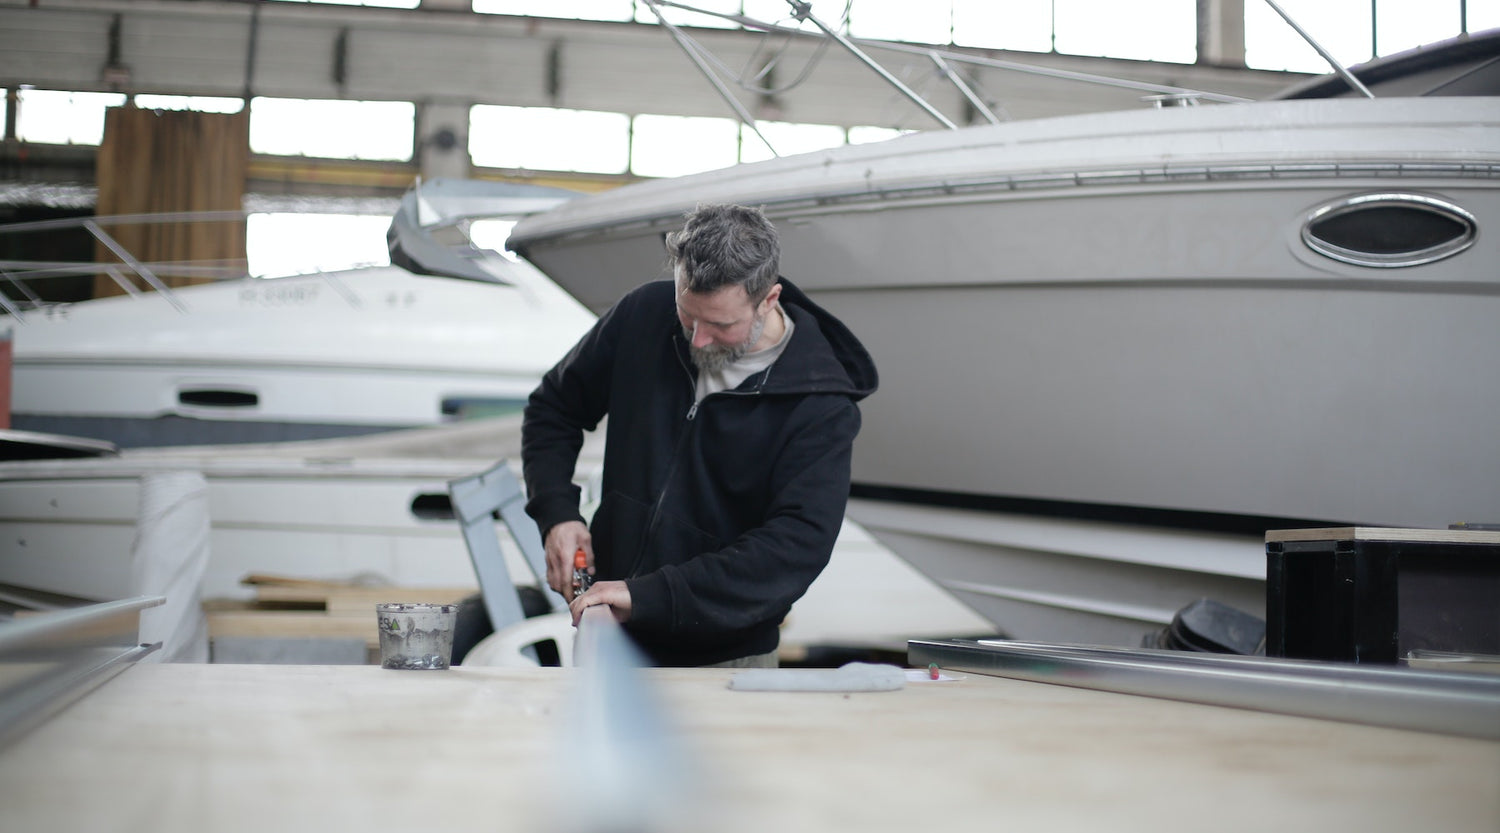 Repairing a vessel after an accident or event isn’t just about making it look like new.